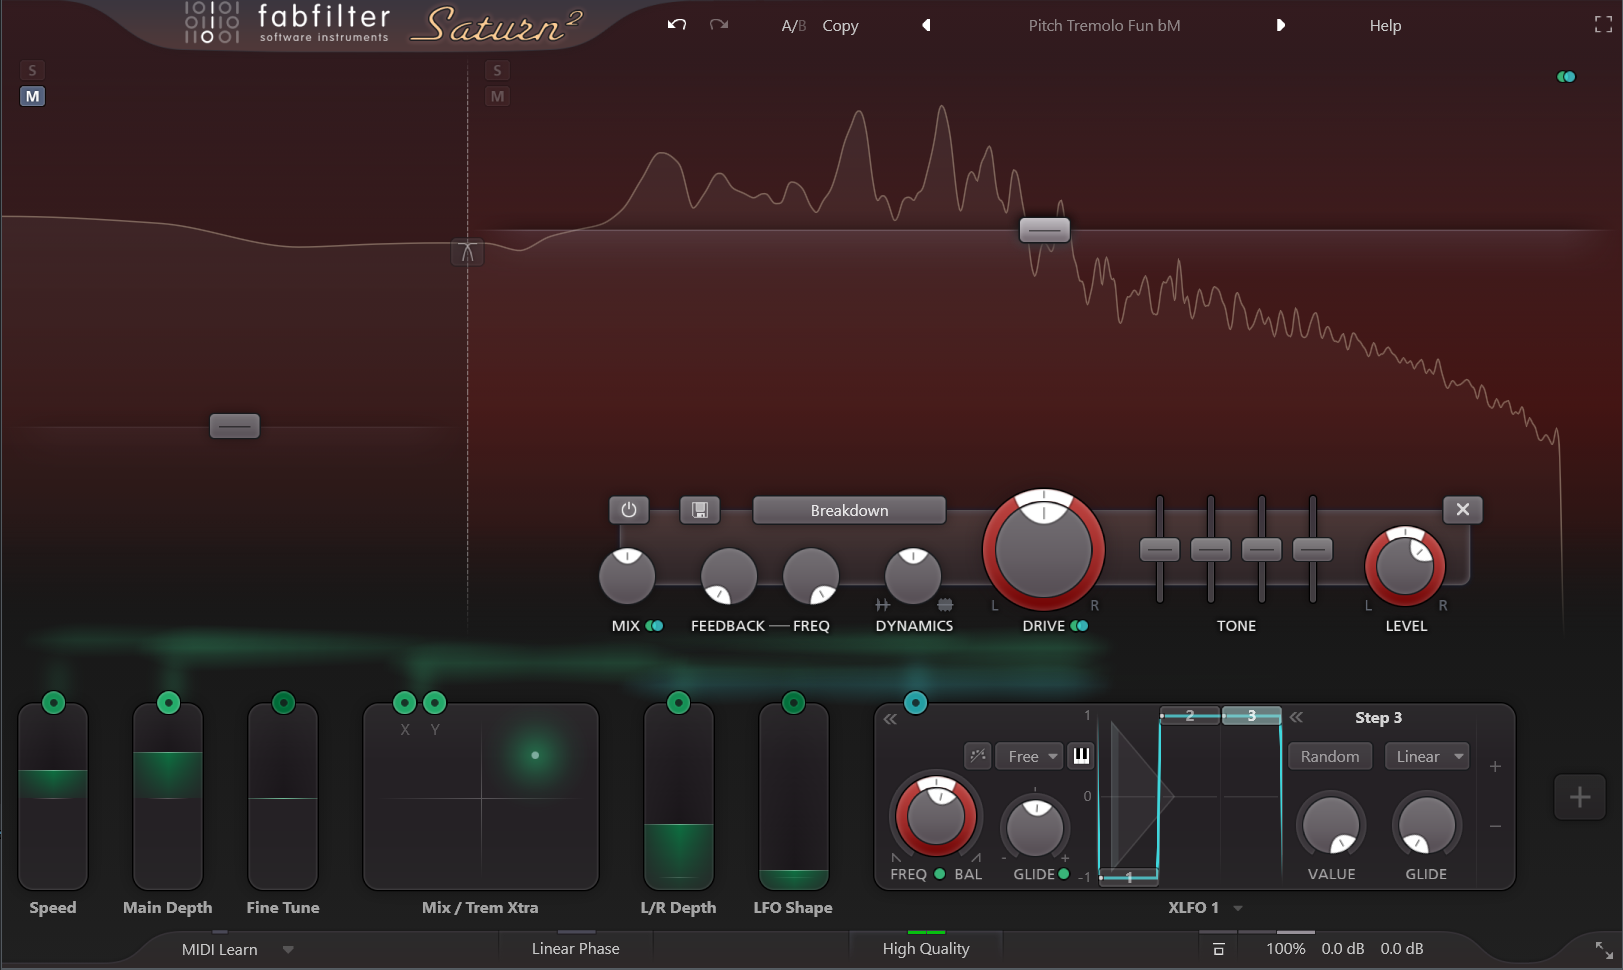 FabFilter Saturn 2 Upgrade - Instant Delivery